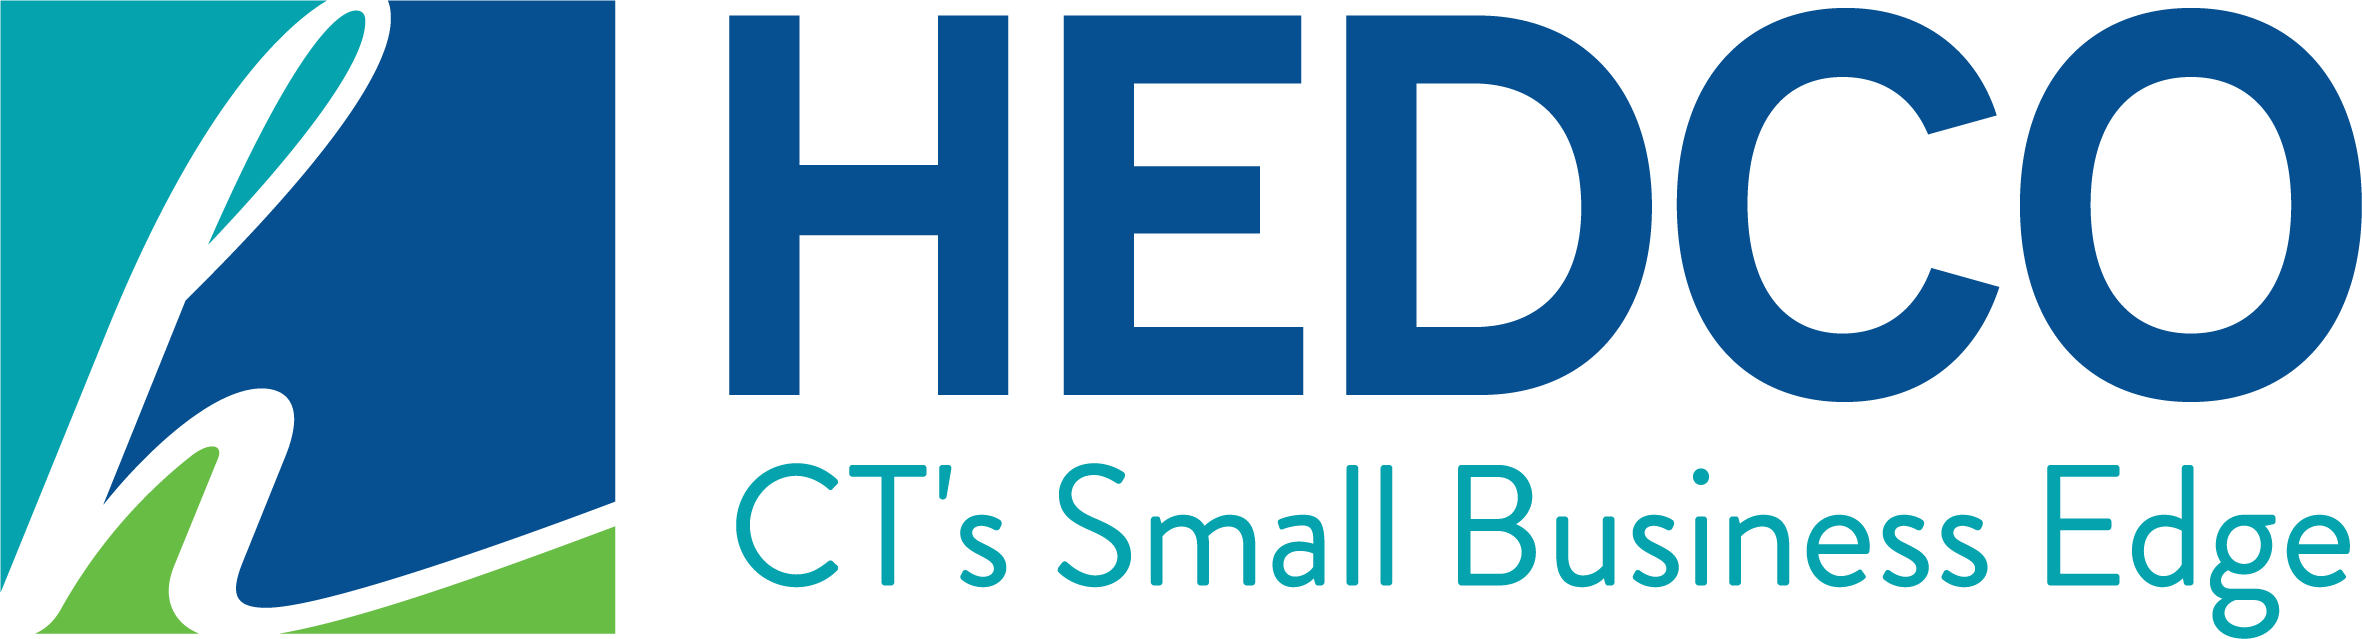 HEDCO